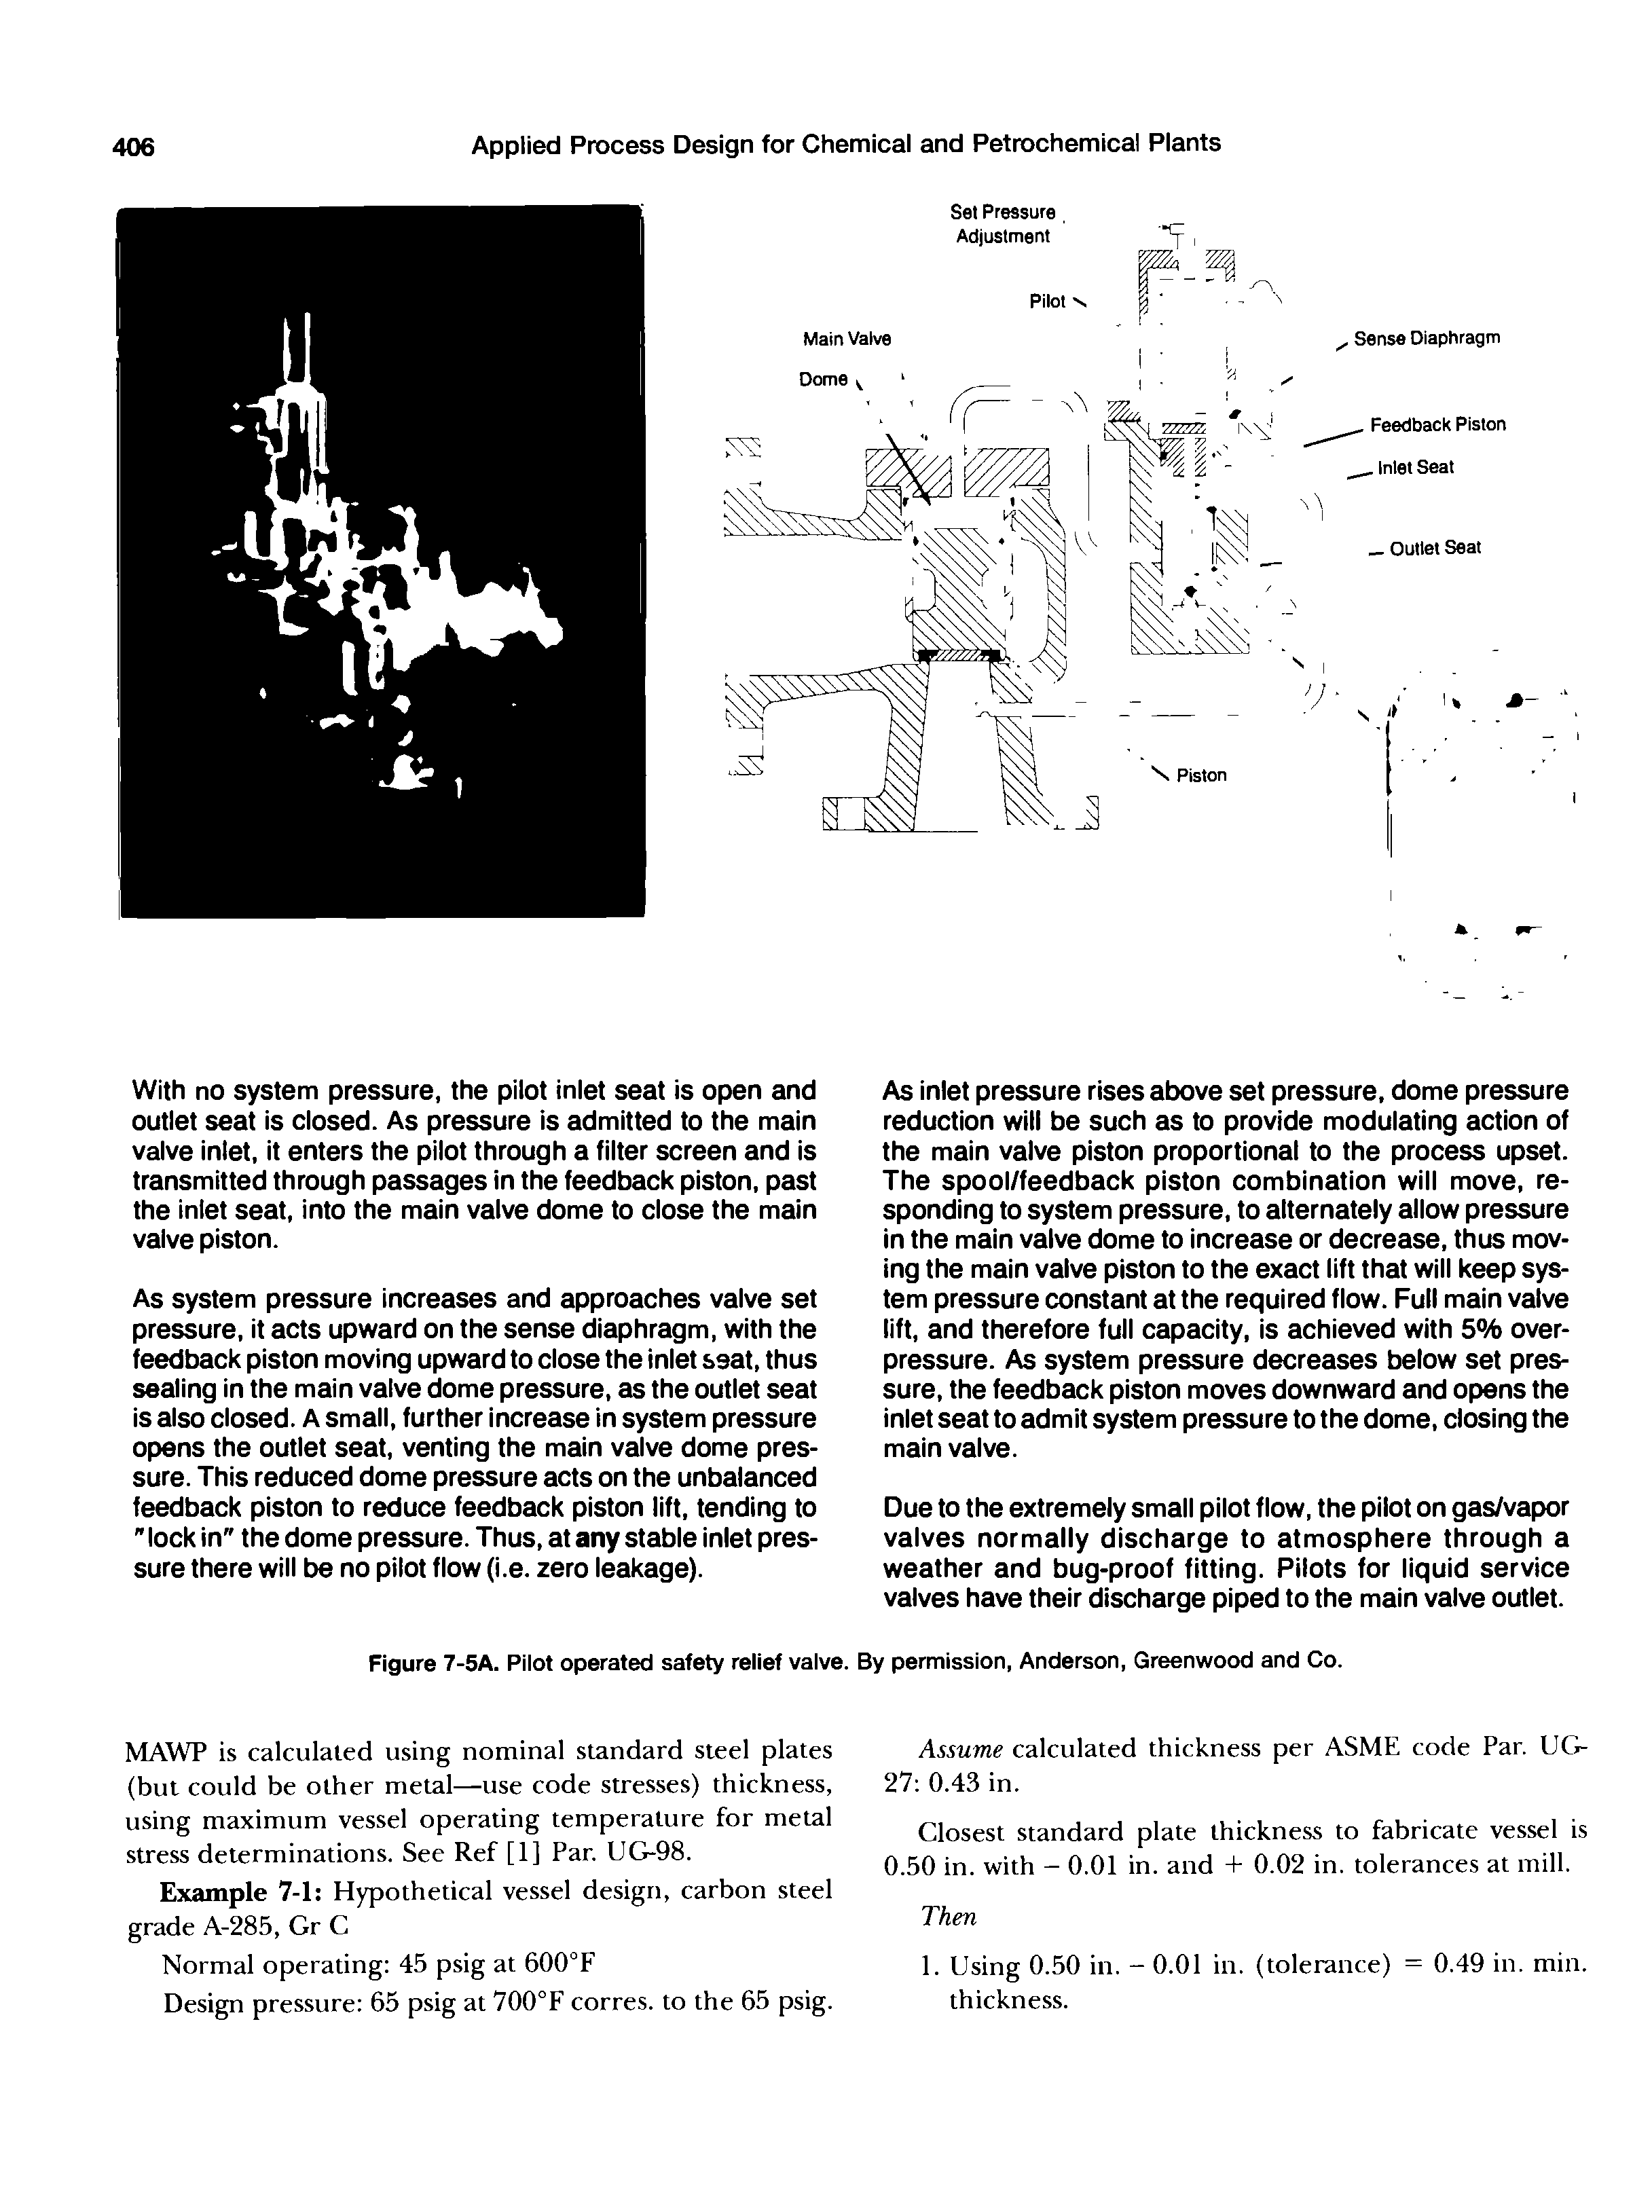 Figure 7-5A. Pilot operated safety relief valve. By permission, Anderson, Greenwood and Co.